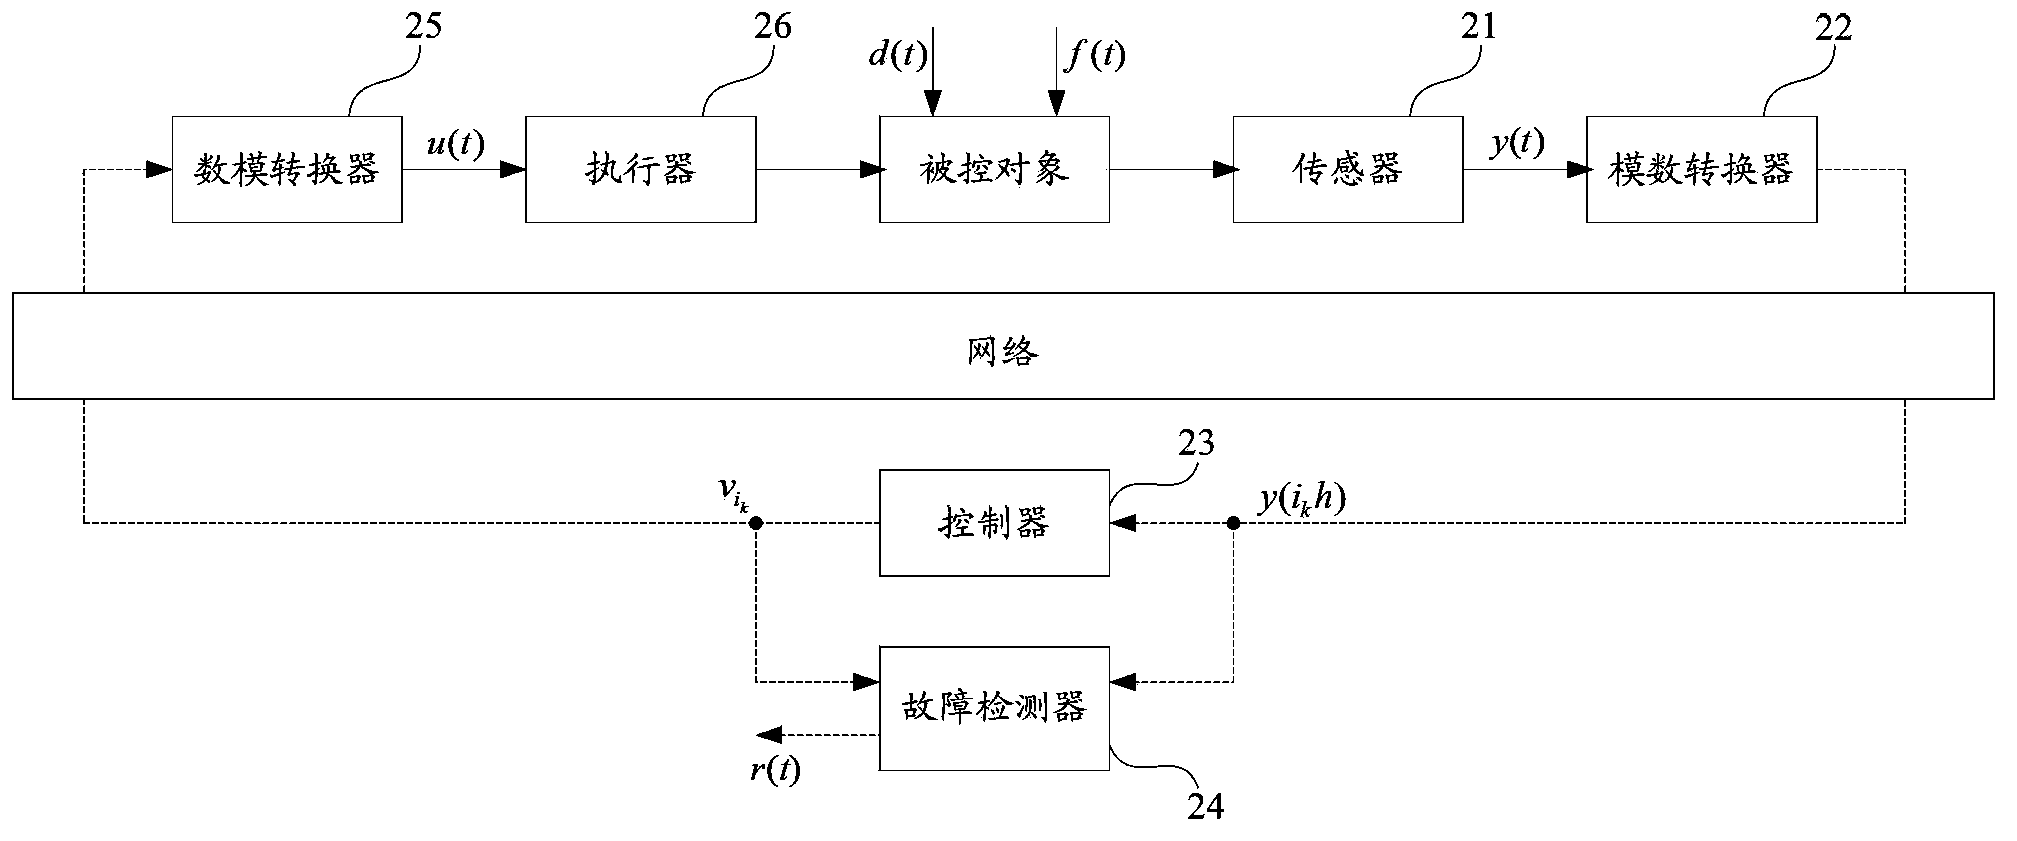 Method and system for detecting and controlling network control system